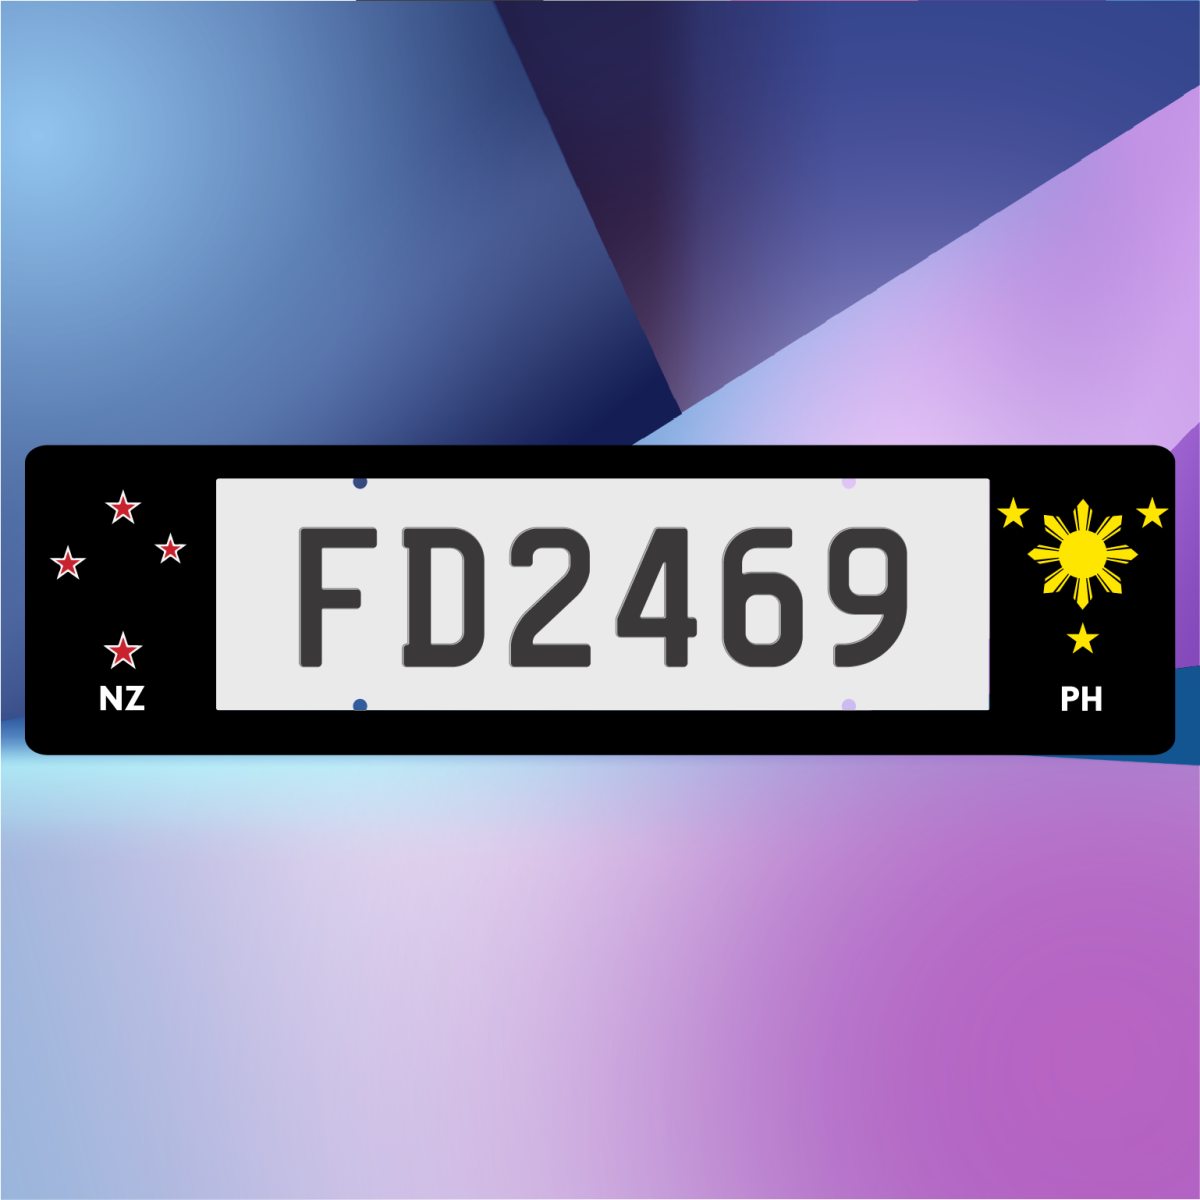 NZ PH Winged Plate Frames - Filthy Dog Decals